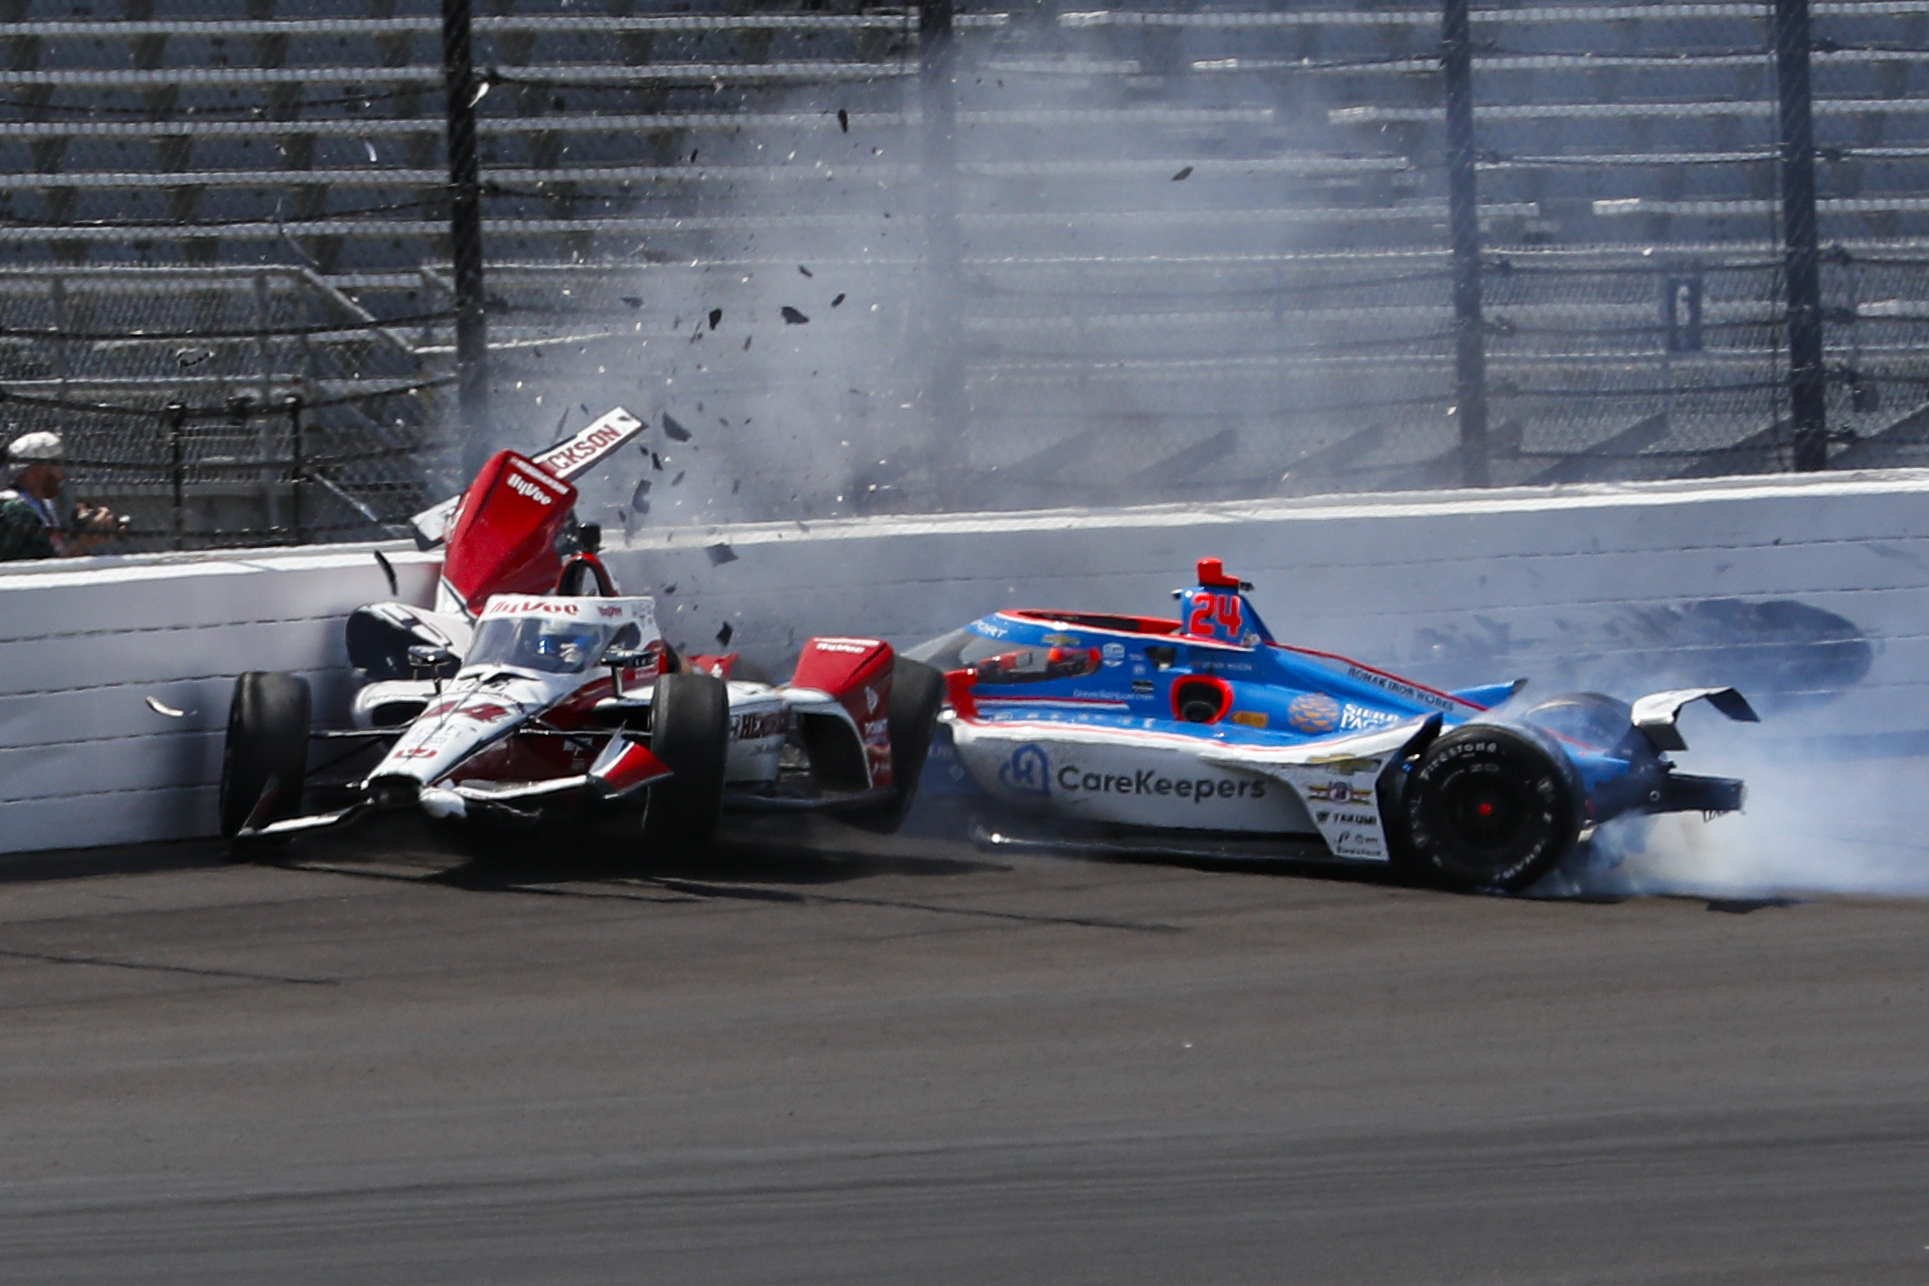 Stefan Wilson out of Indy 500 after crash at practice Indianapolis